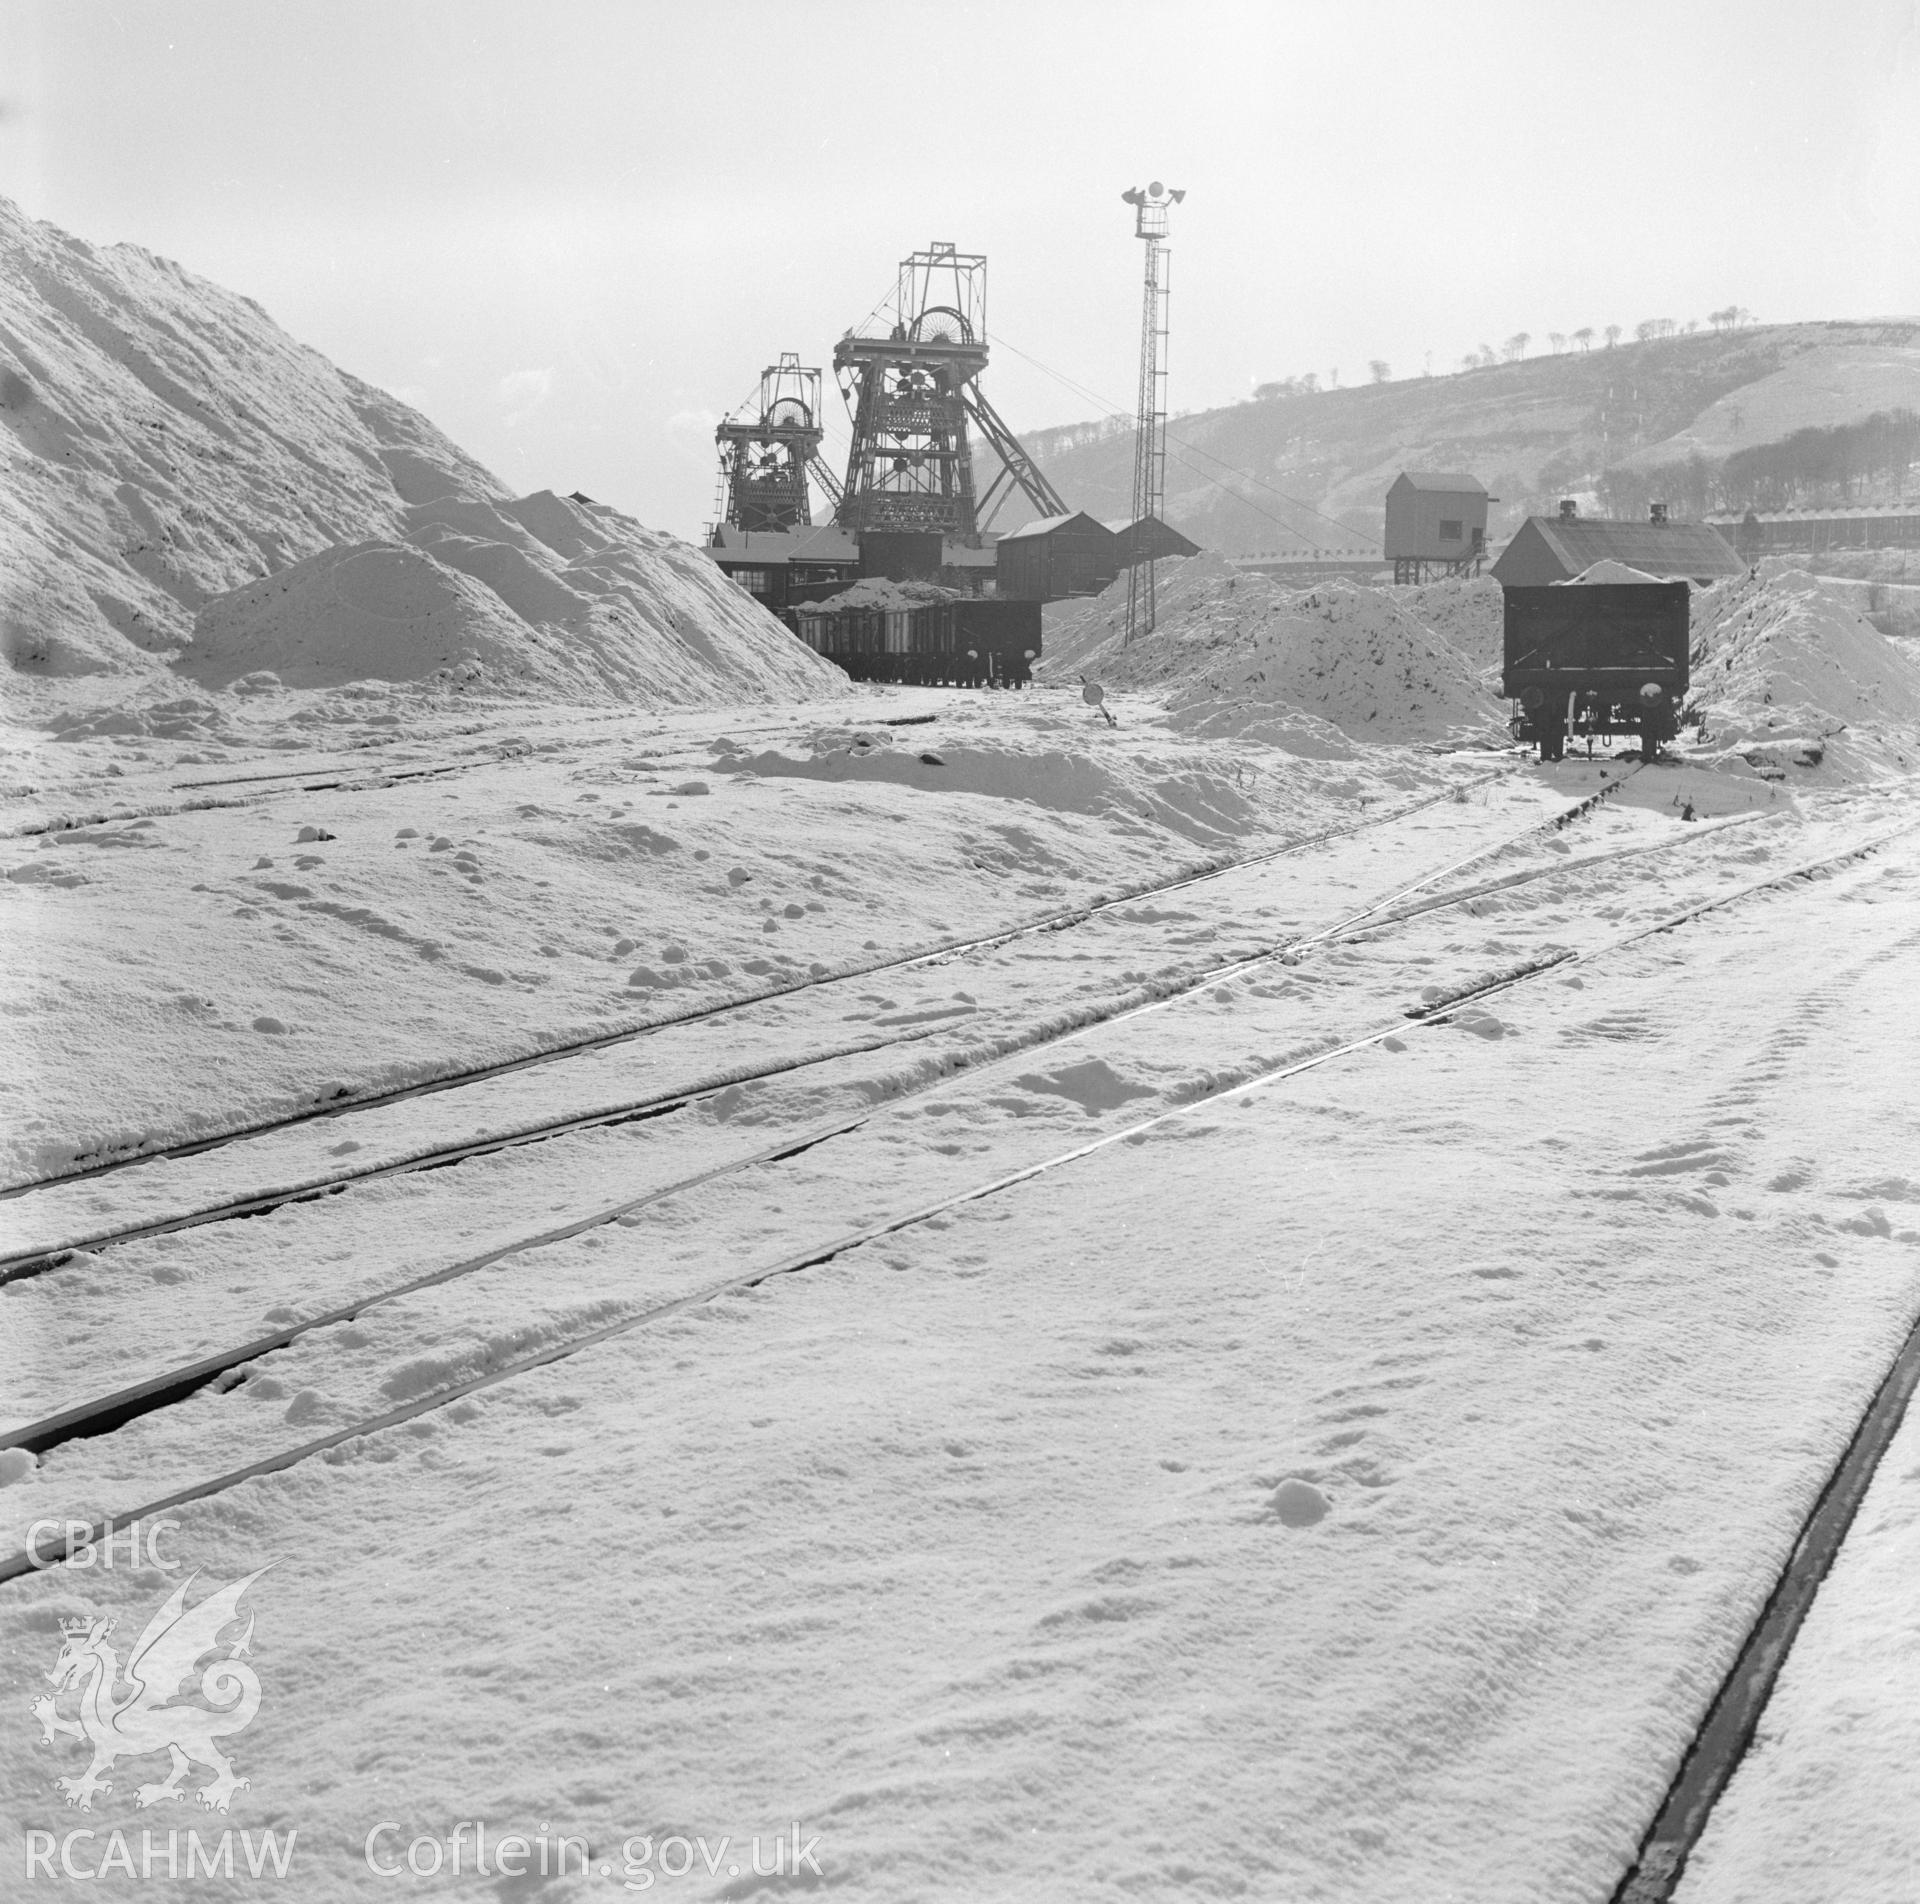 Digital copy of an acetate negative showing Taff Colliery in snow, from the John Cornwell Collection.